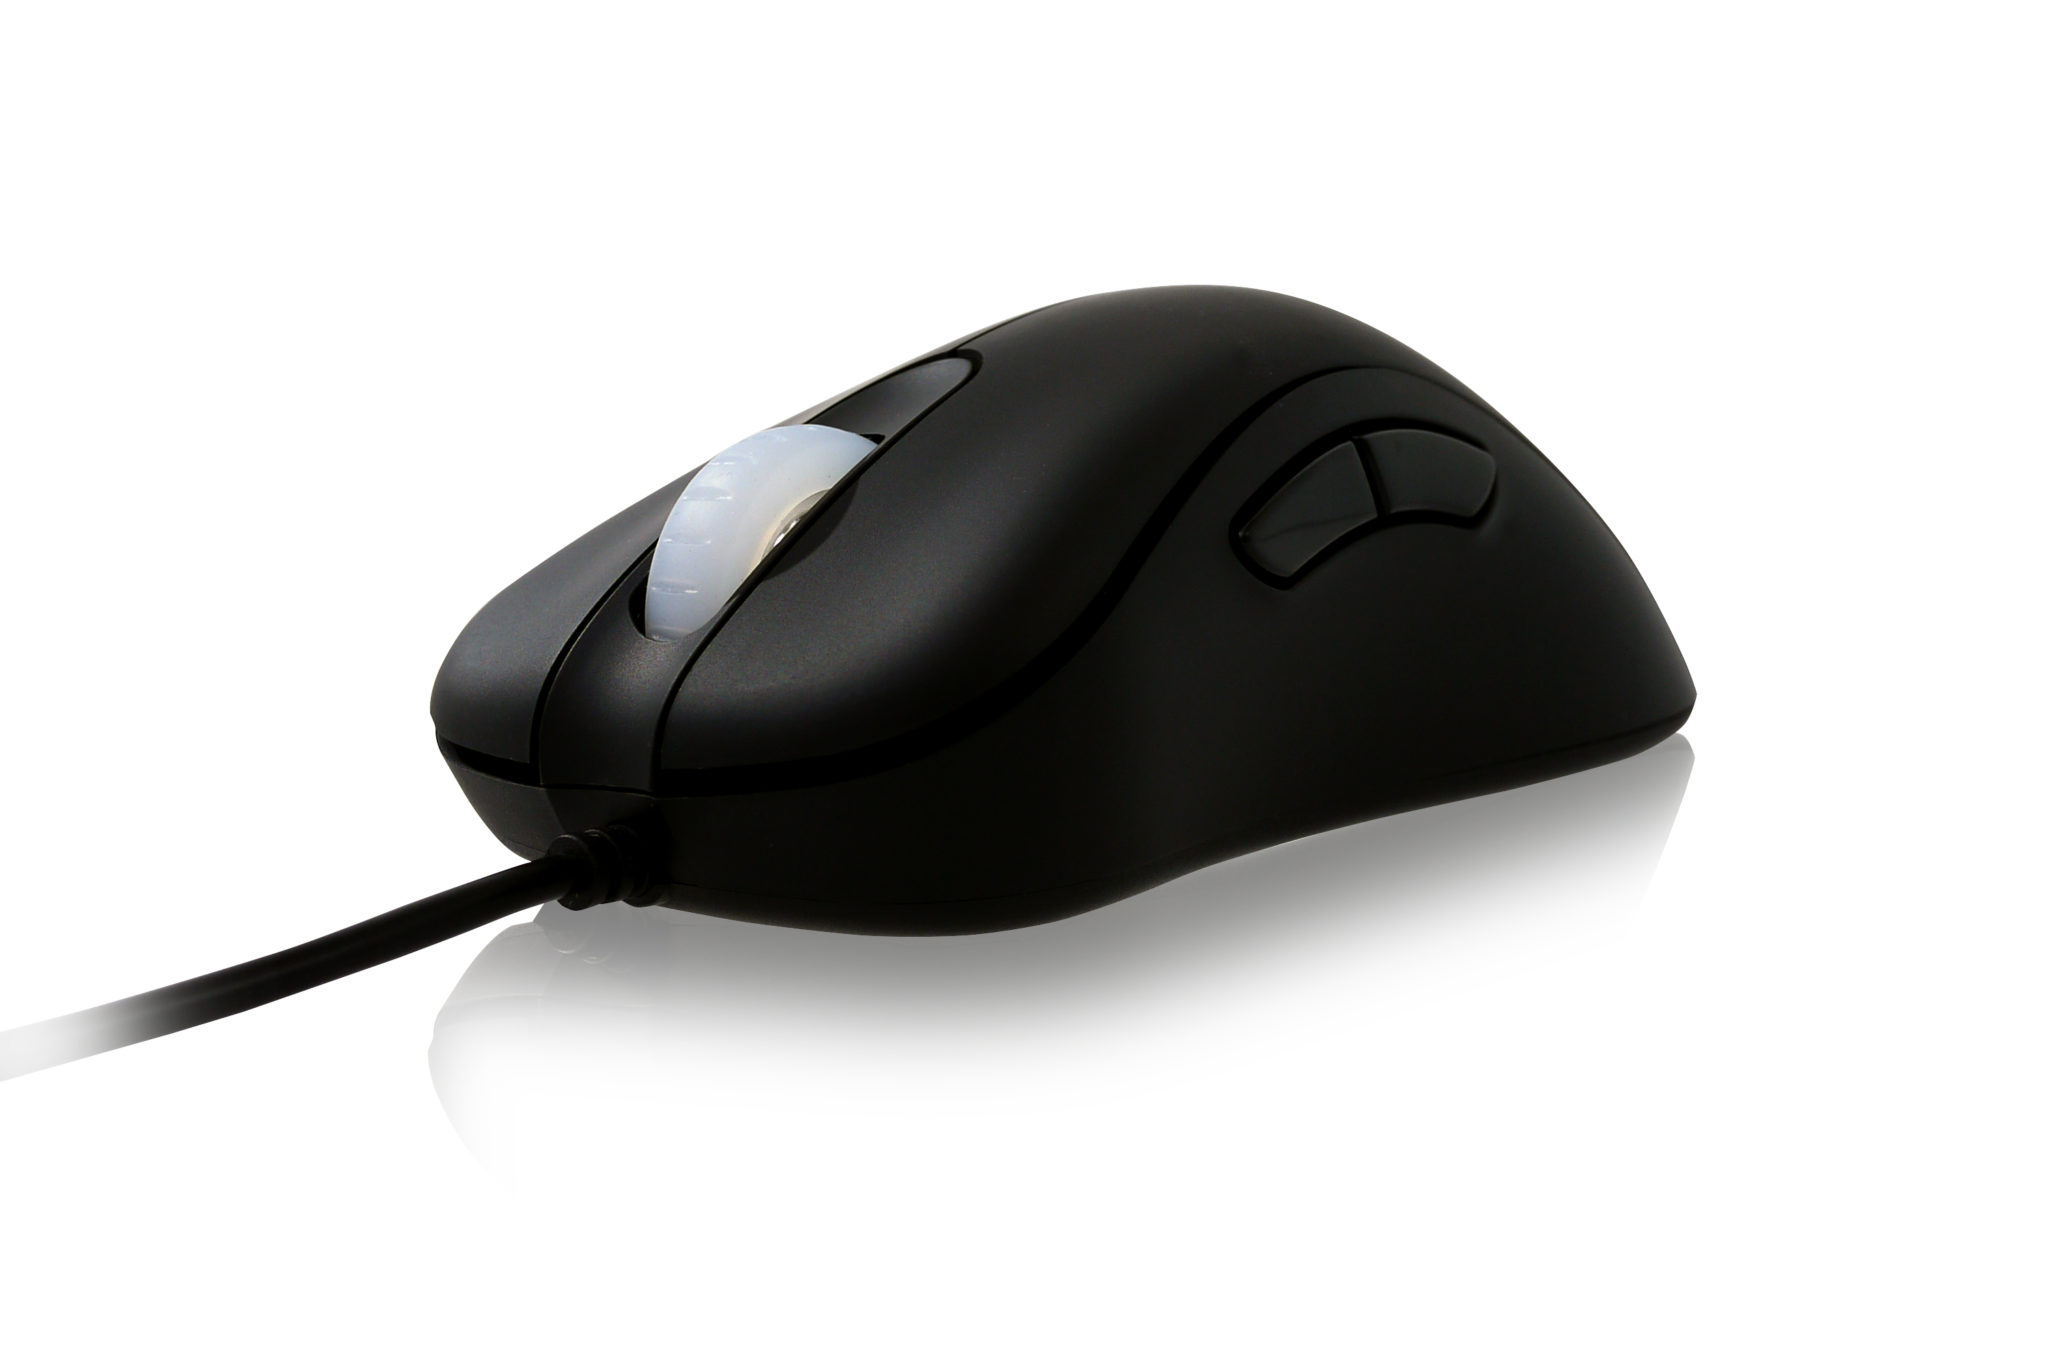 Zowie EC1-A Competitive Gaming Mouse – Test/Review